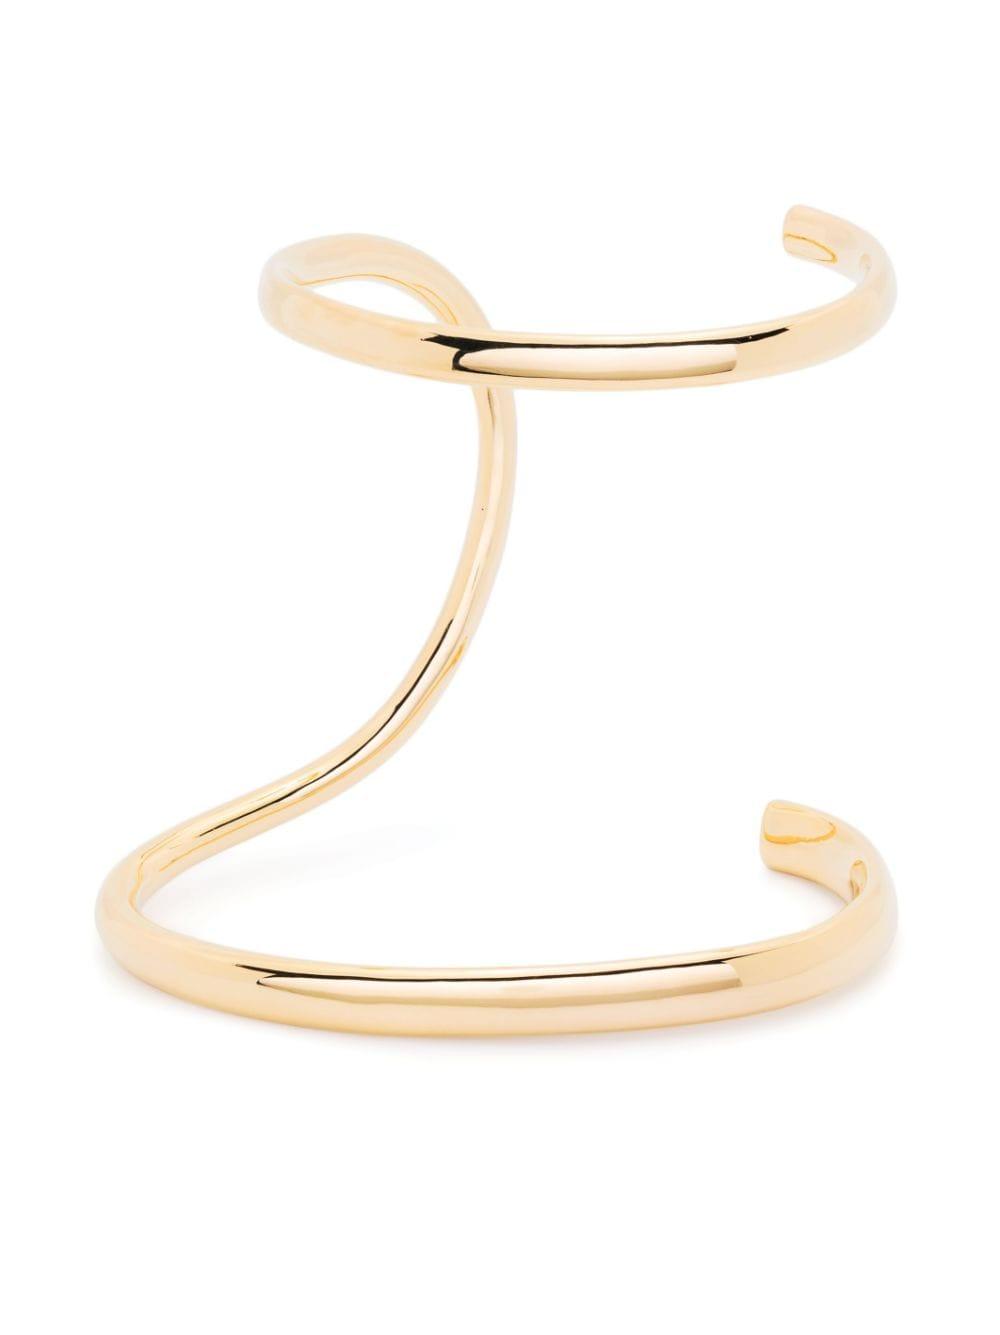 Charlotte Chesnais Surma Gold-plated Cuff Bracelet in Natural | Lyst